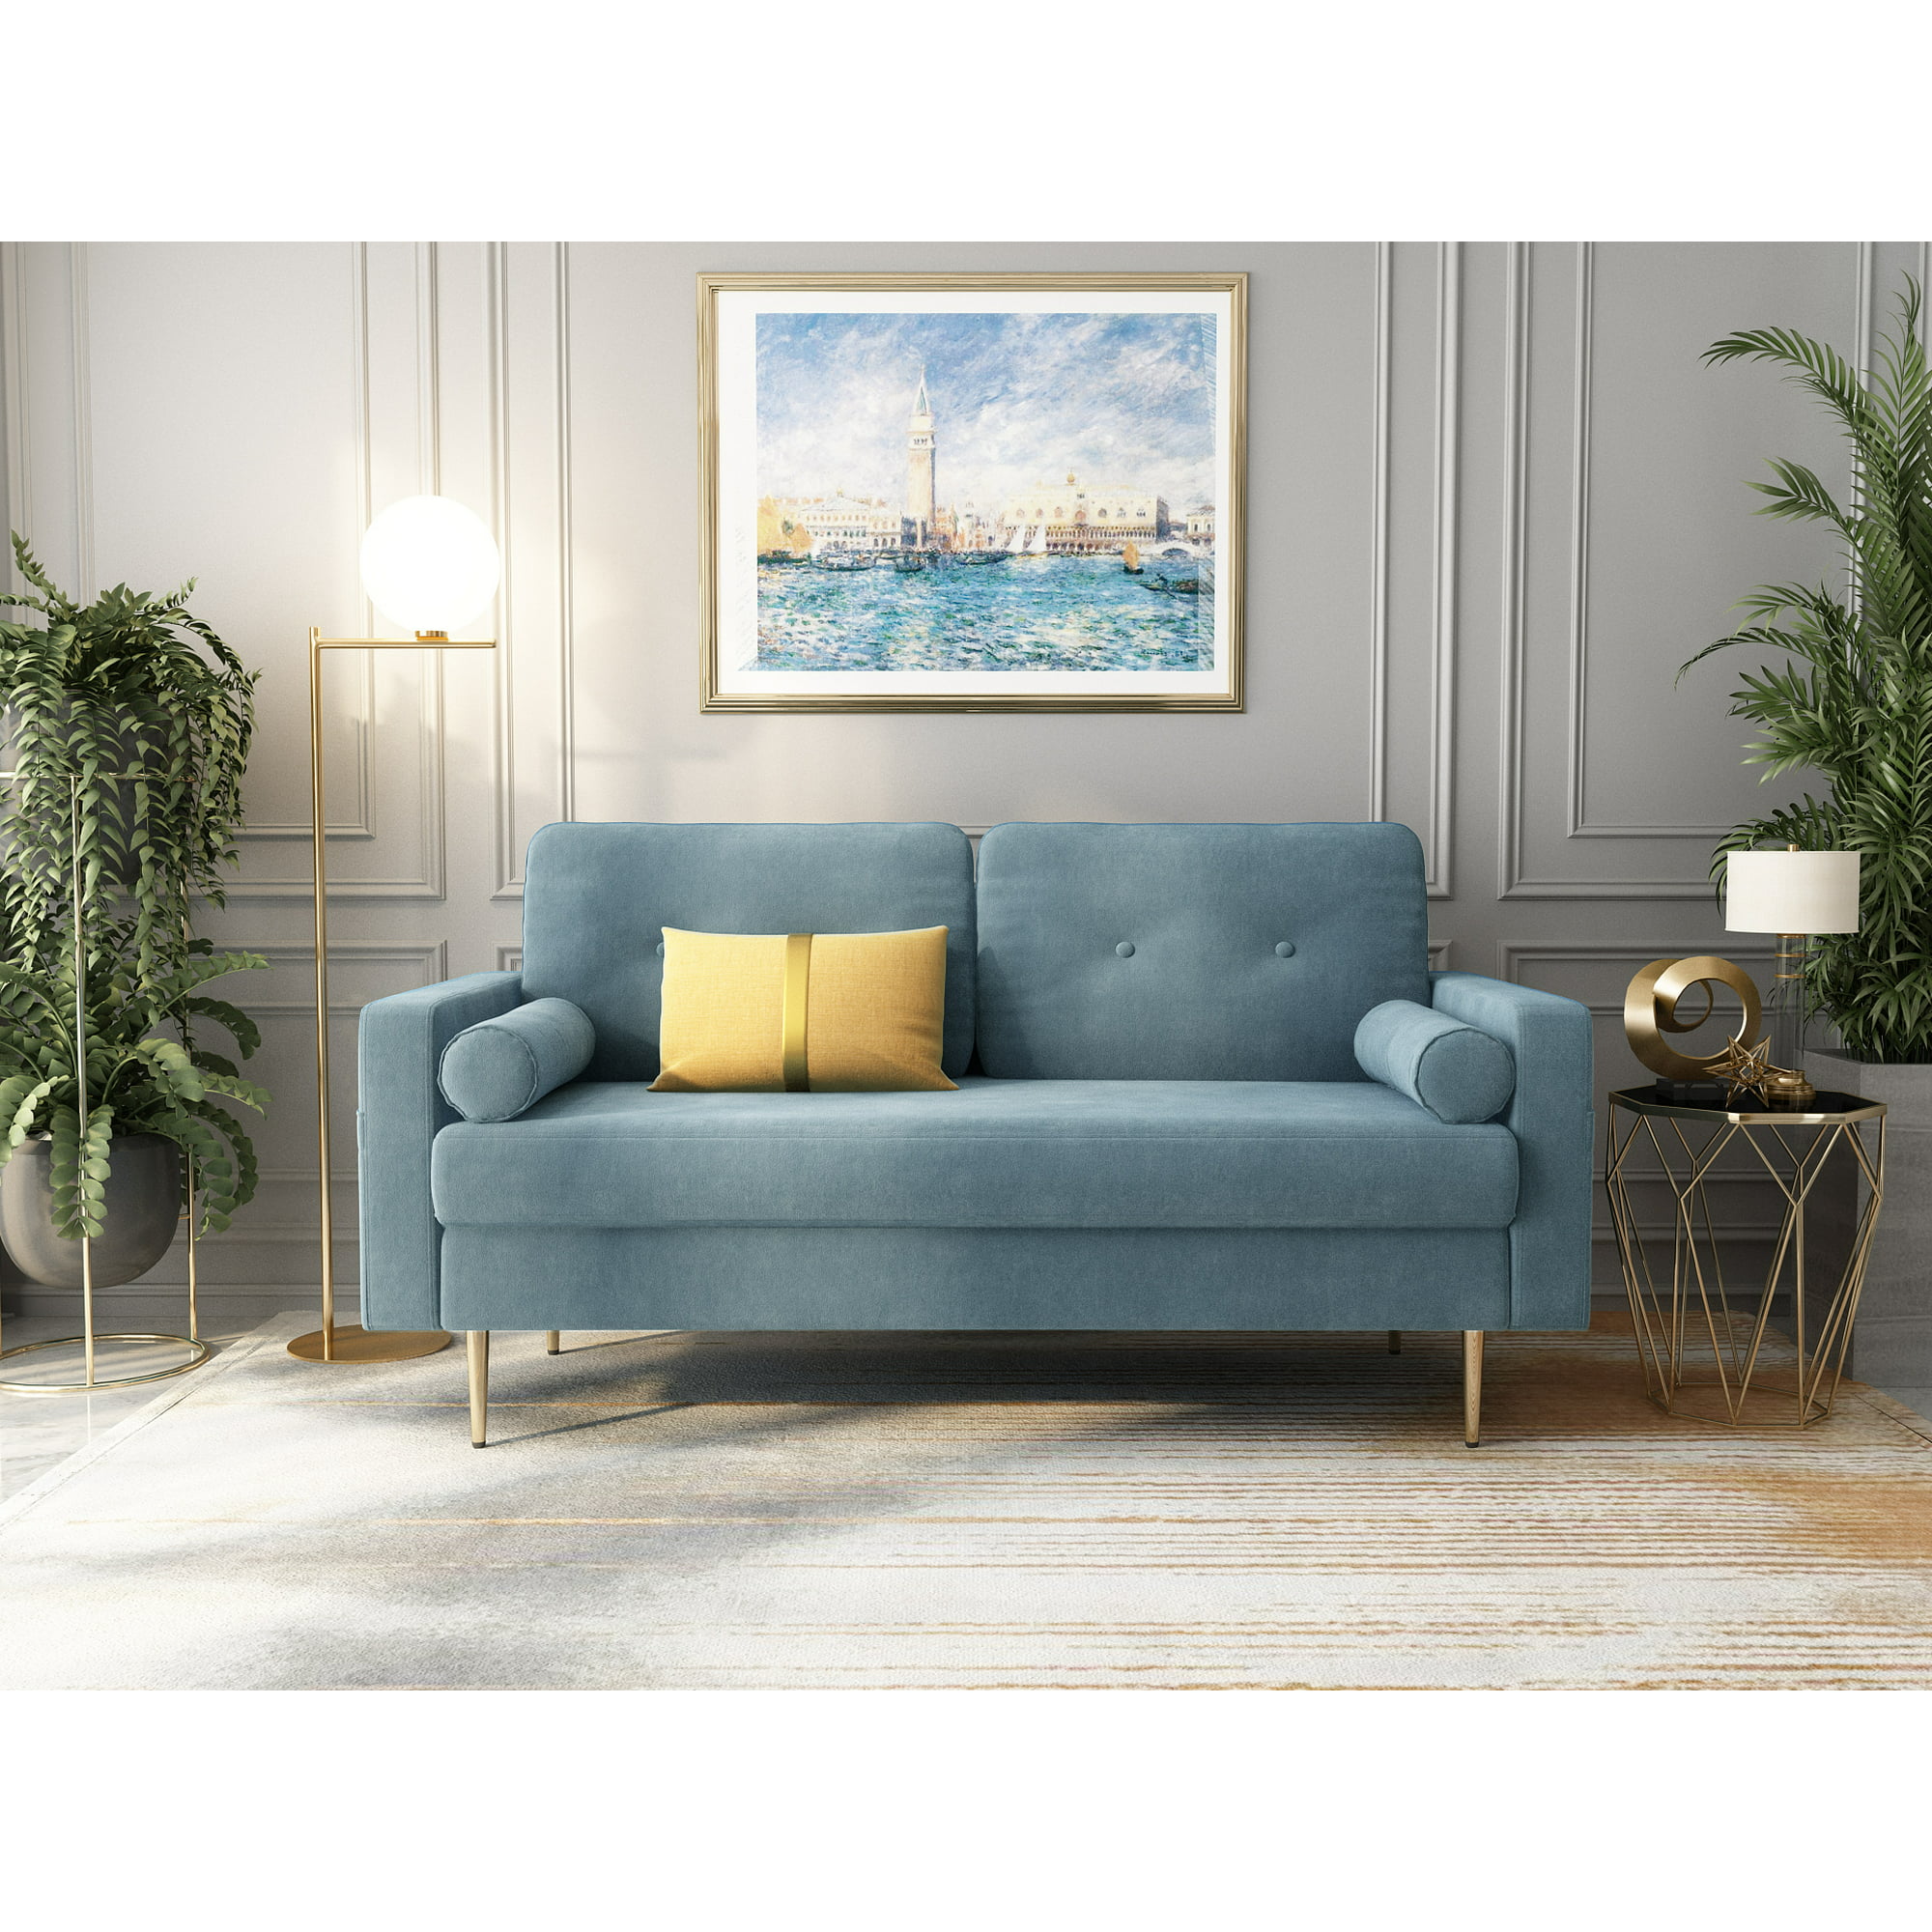 Sofa In A Box Real Velvet Modern Design 2 Seats Cozy Sofa Couch Includes Golden Legs And Two Comfortable Tufted Cushions Light Blue Steel Blue Available In 6 Colors Walmart Canada